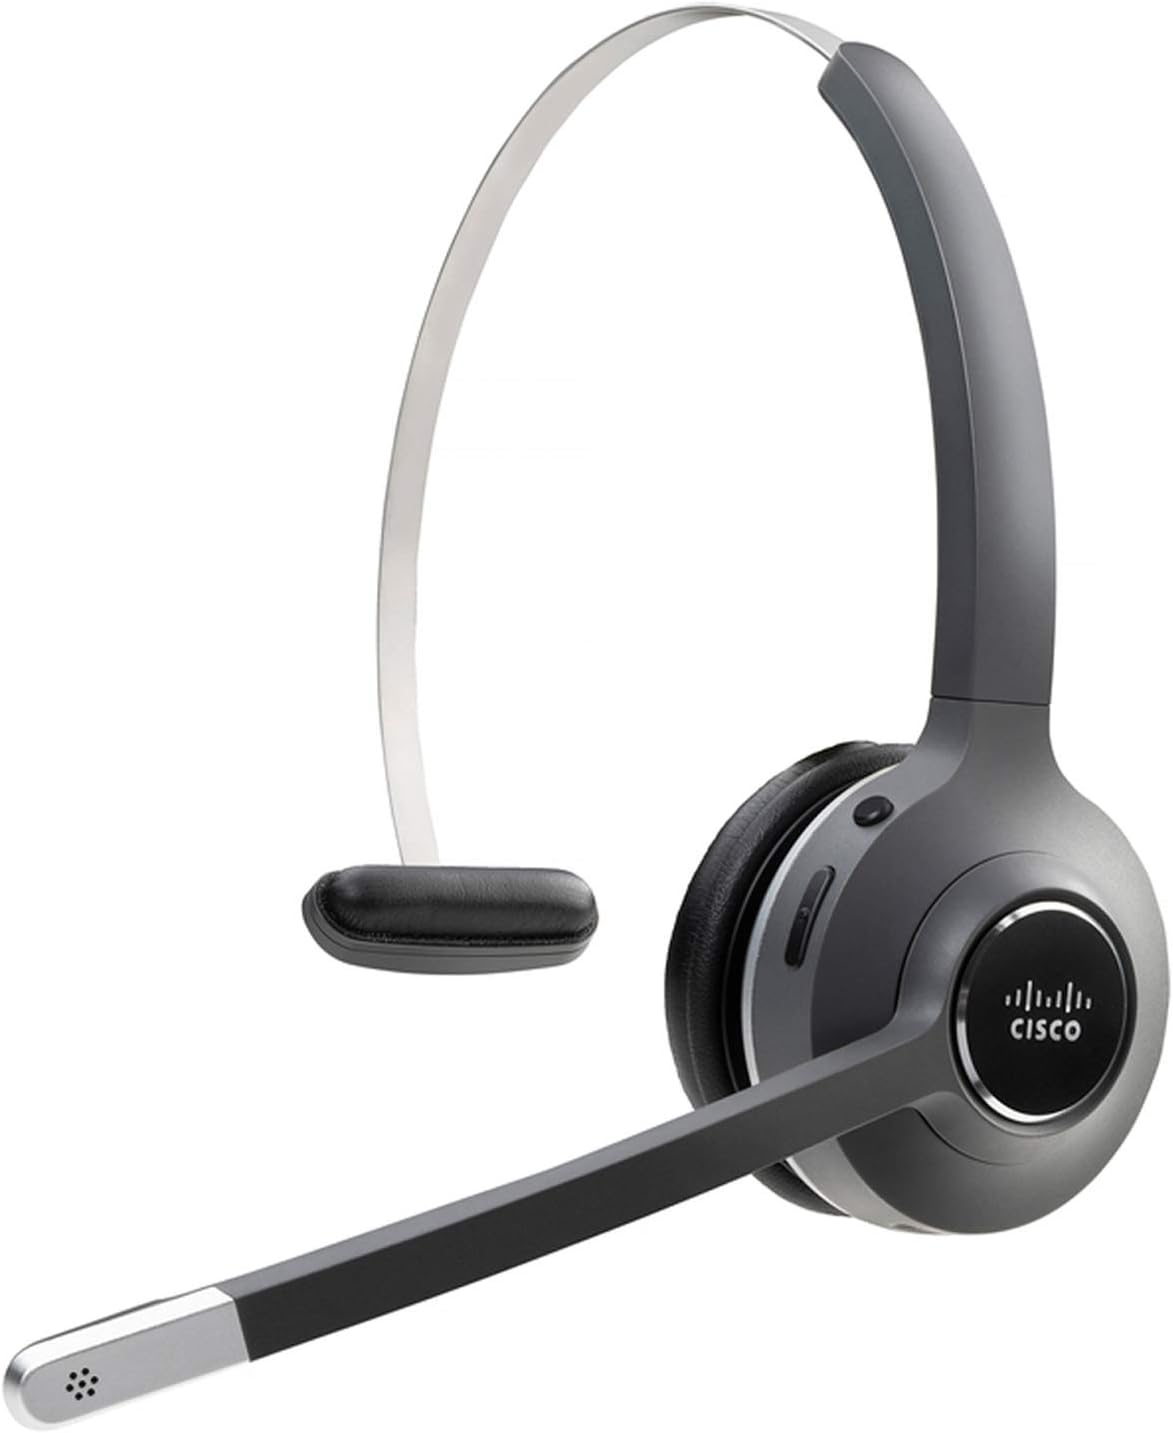 CP-HS-WL-561-M-EU Wireless Single Headset with Multibase Station. Frequency Band: Europe, U.K., Asia